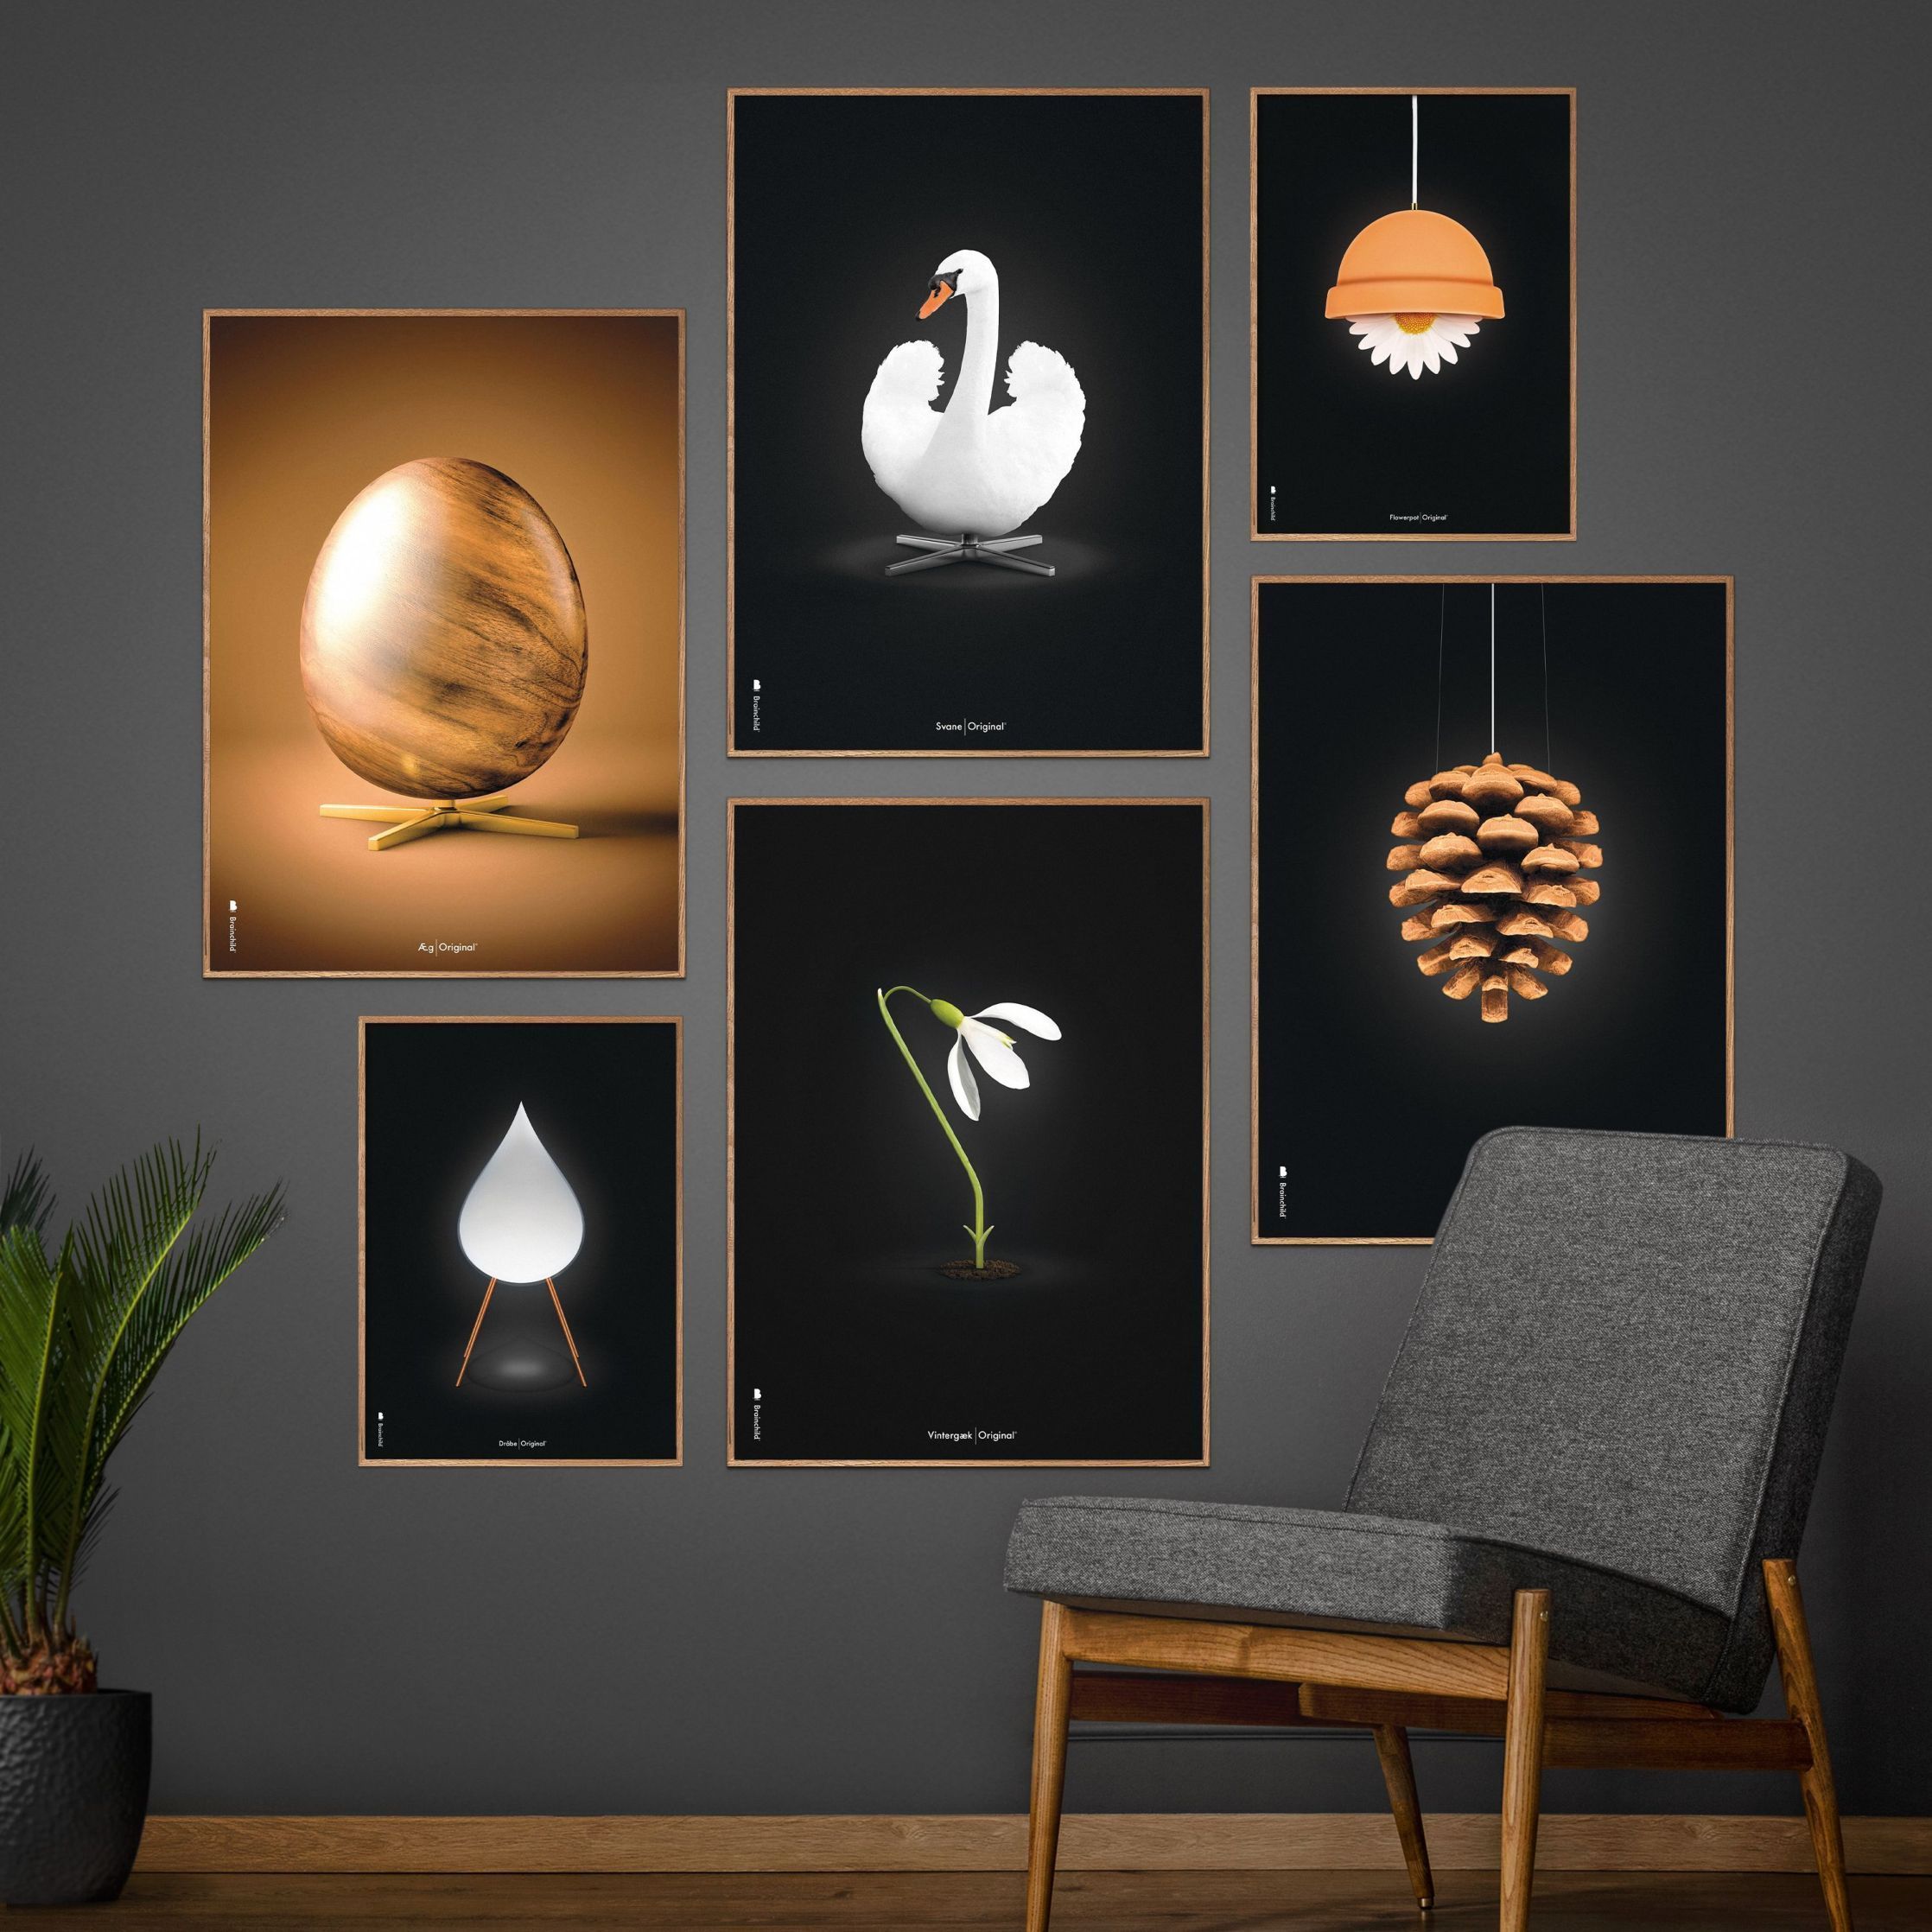 Brainchild Flowerpot Classic Poster, Frame In Black Lacquered Wood A5, Black Background